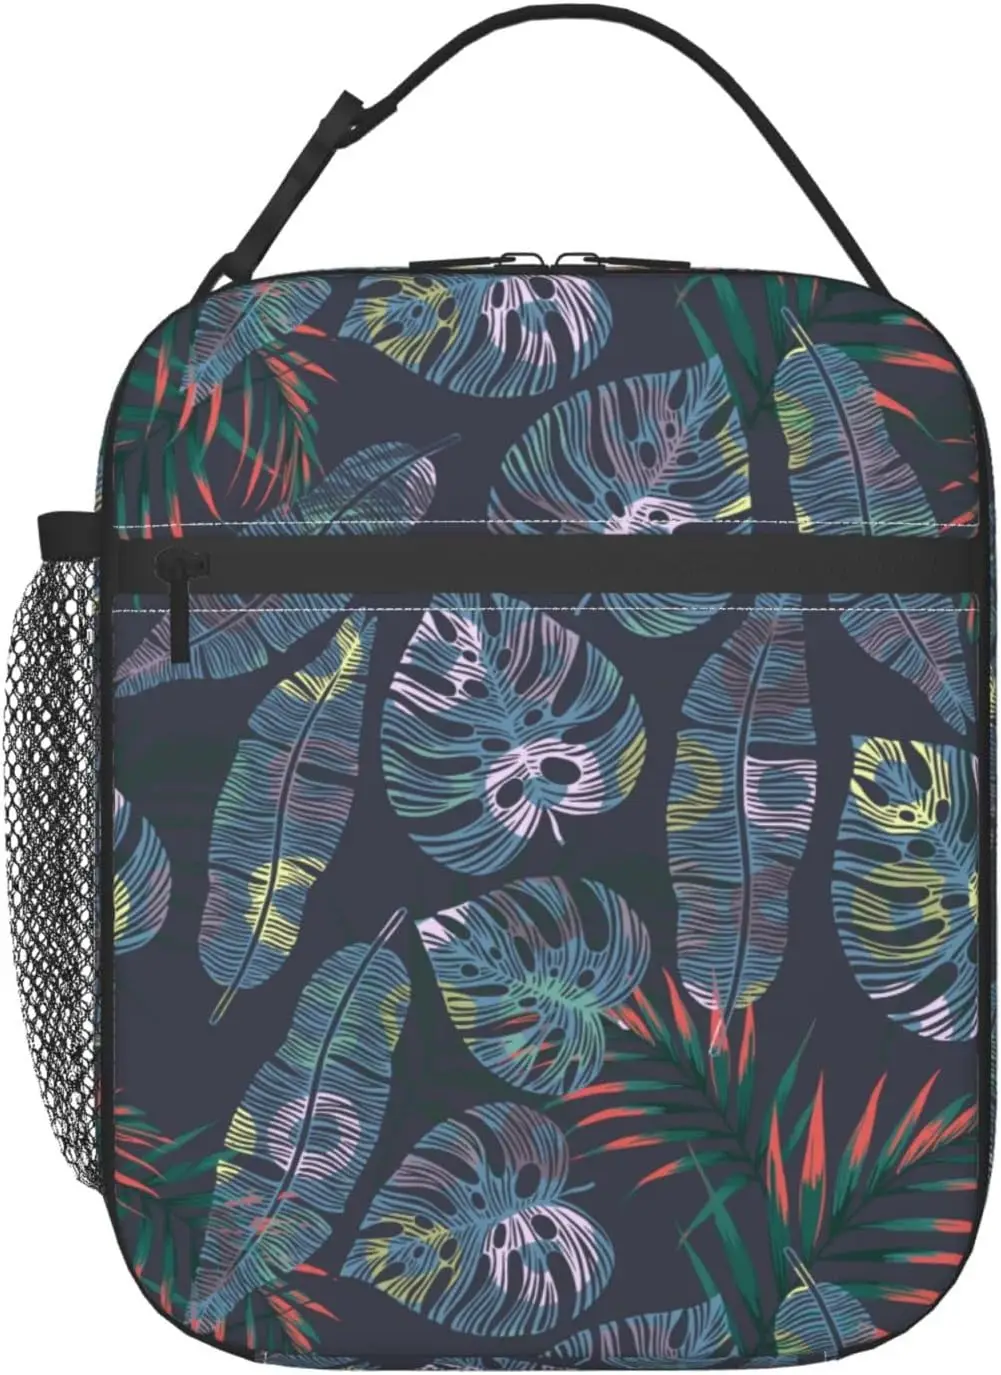 

Tropical Colorful Palm Leaf Insulated Lunch Bag Reusable Portable Meal Tote Bag for Office Work Travel Picnic